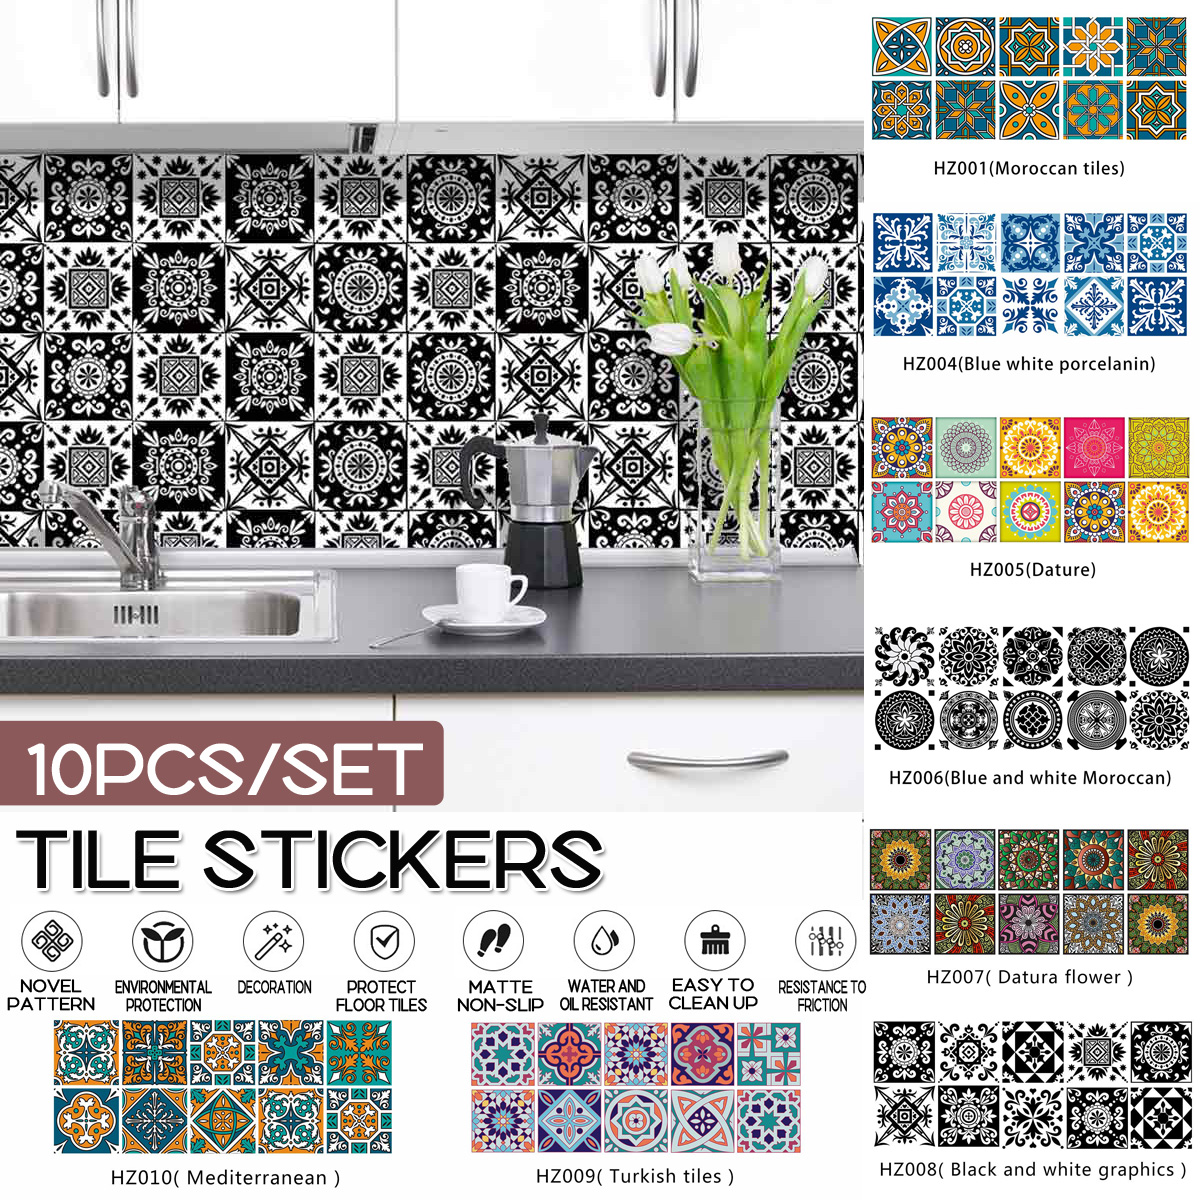 10PCS-Tile-Stickers-Self-Adhesive-Removable-Wall-Sticker-Decal-Decor-Water-Oil-proof-1823164-1